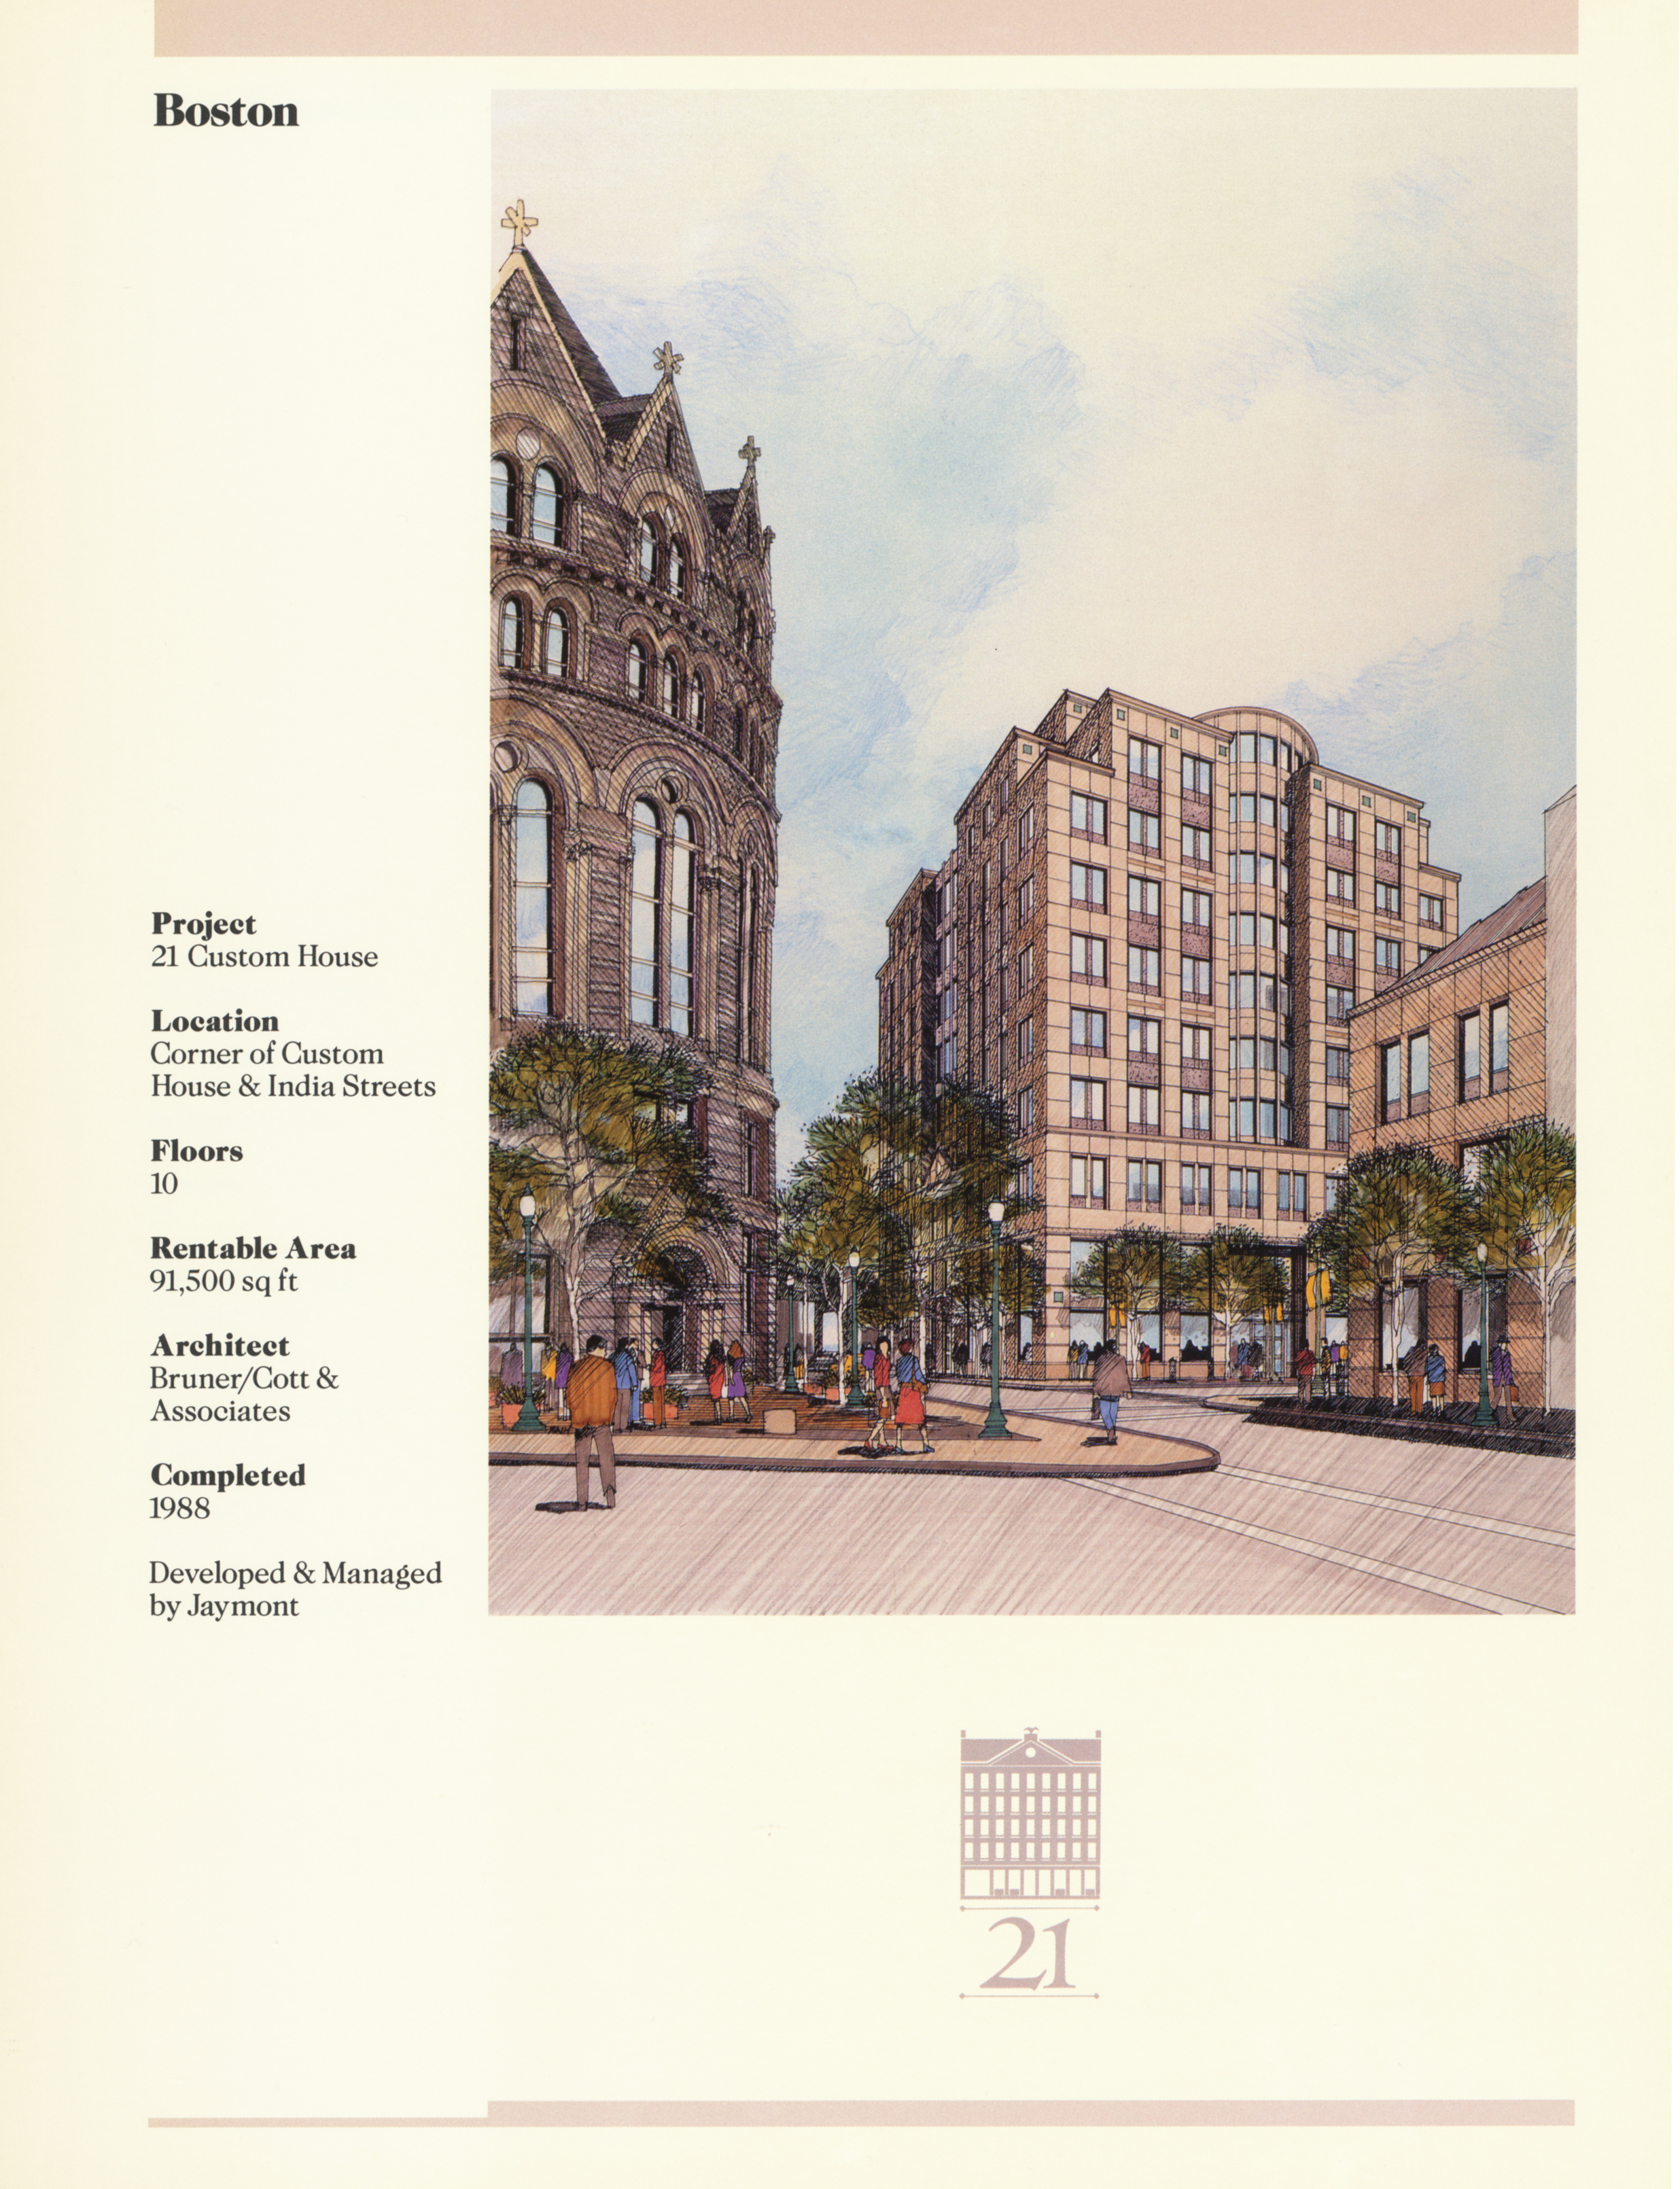 Fact sheet with building details and a large image of the building rendered before it was built.